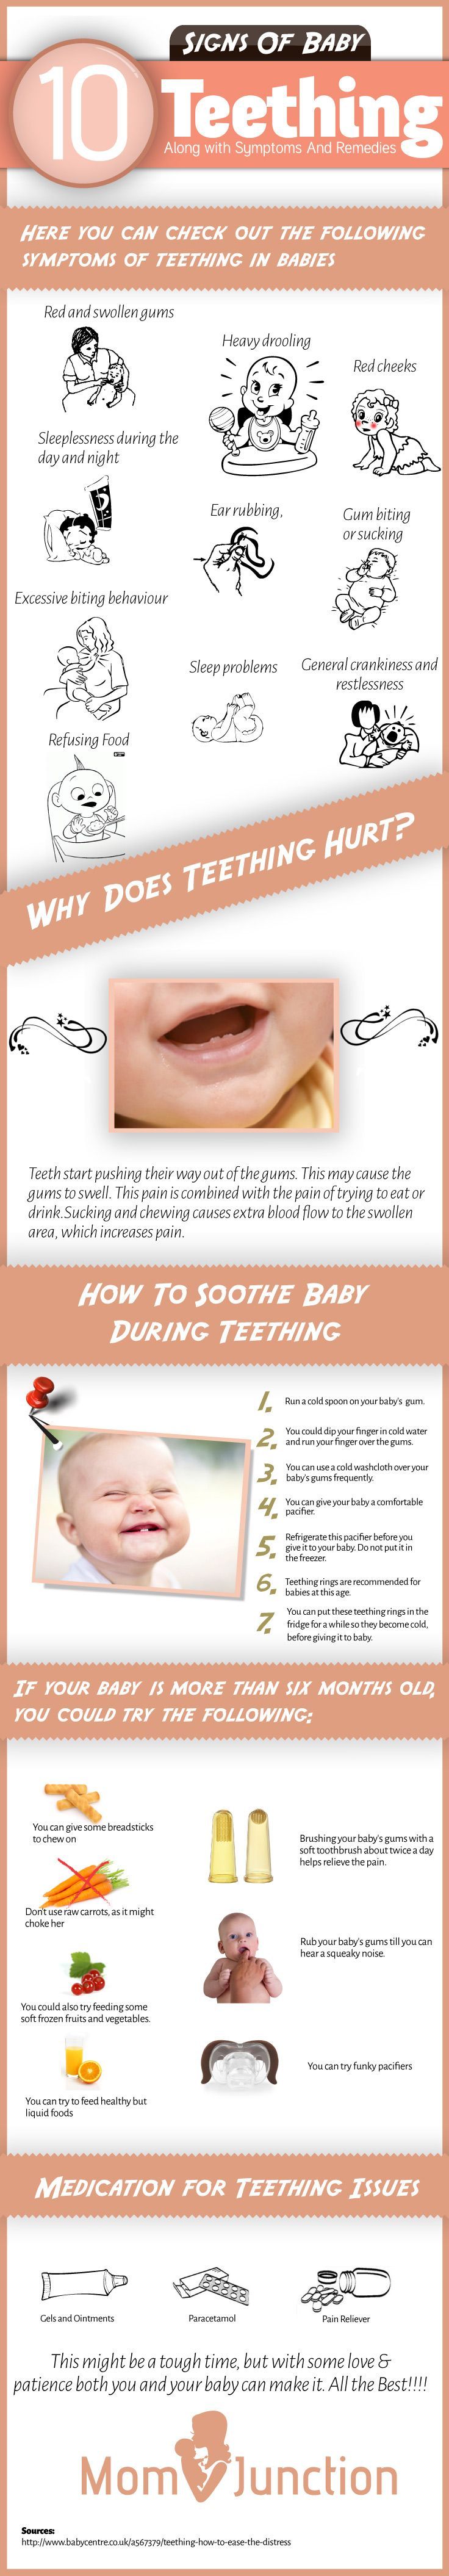 13 Signs Of Baby Teething Along With Symptoms And Remedies: Here you can check out the following symptoms